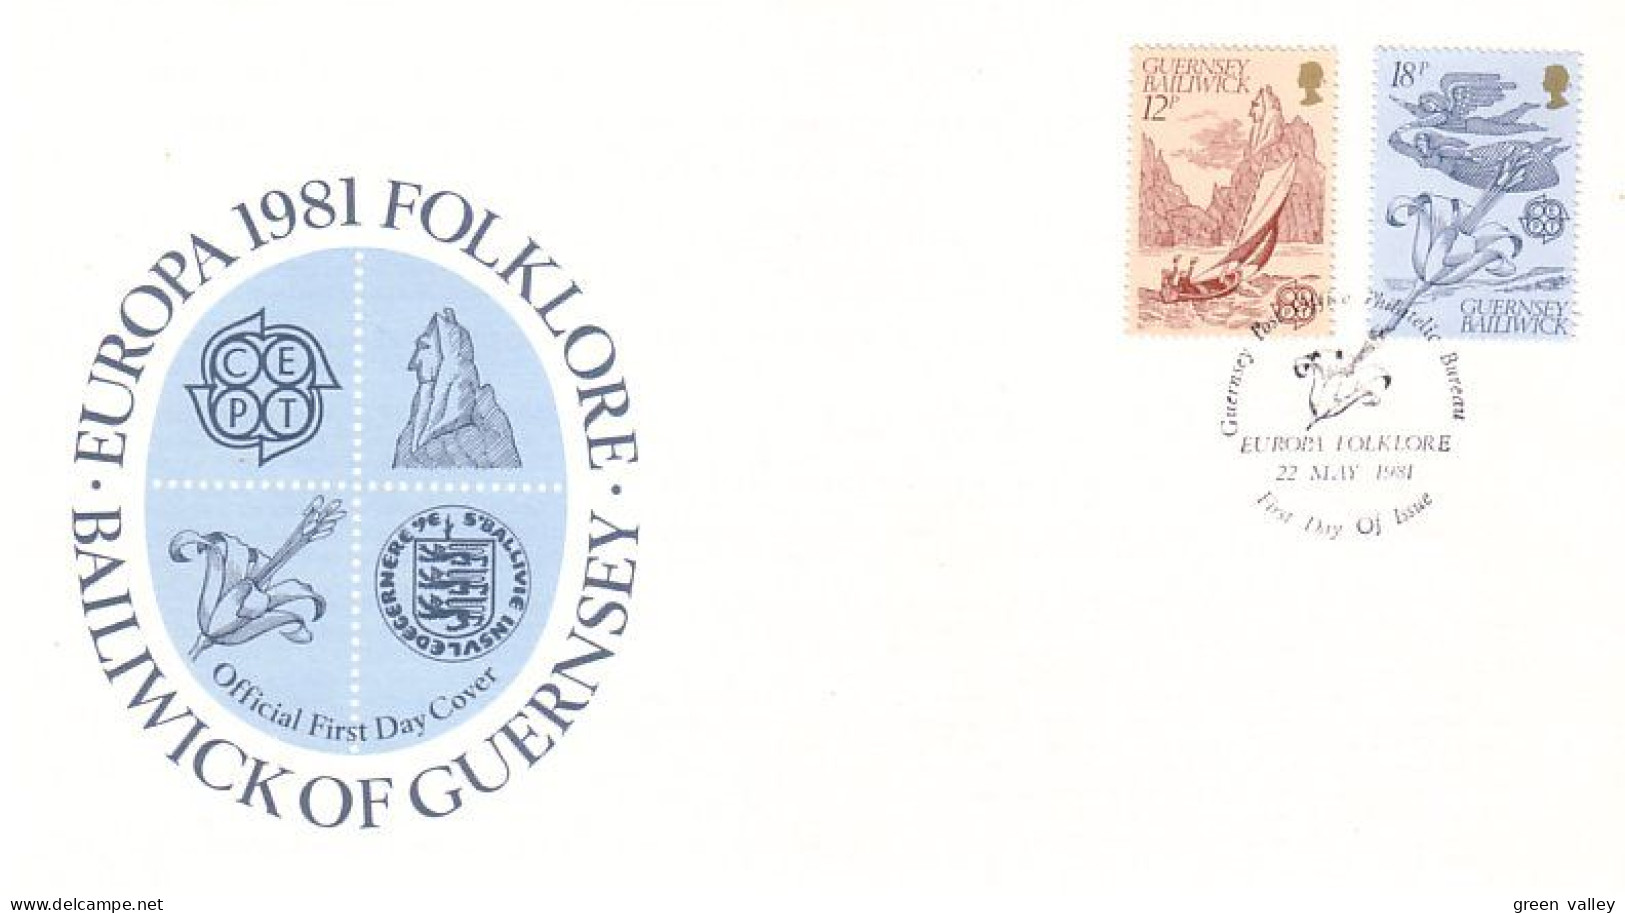 Guernsey Folklore FDC ( A81 706) - Fairy Tales, Popular Stories & Legends